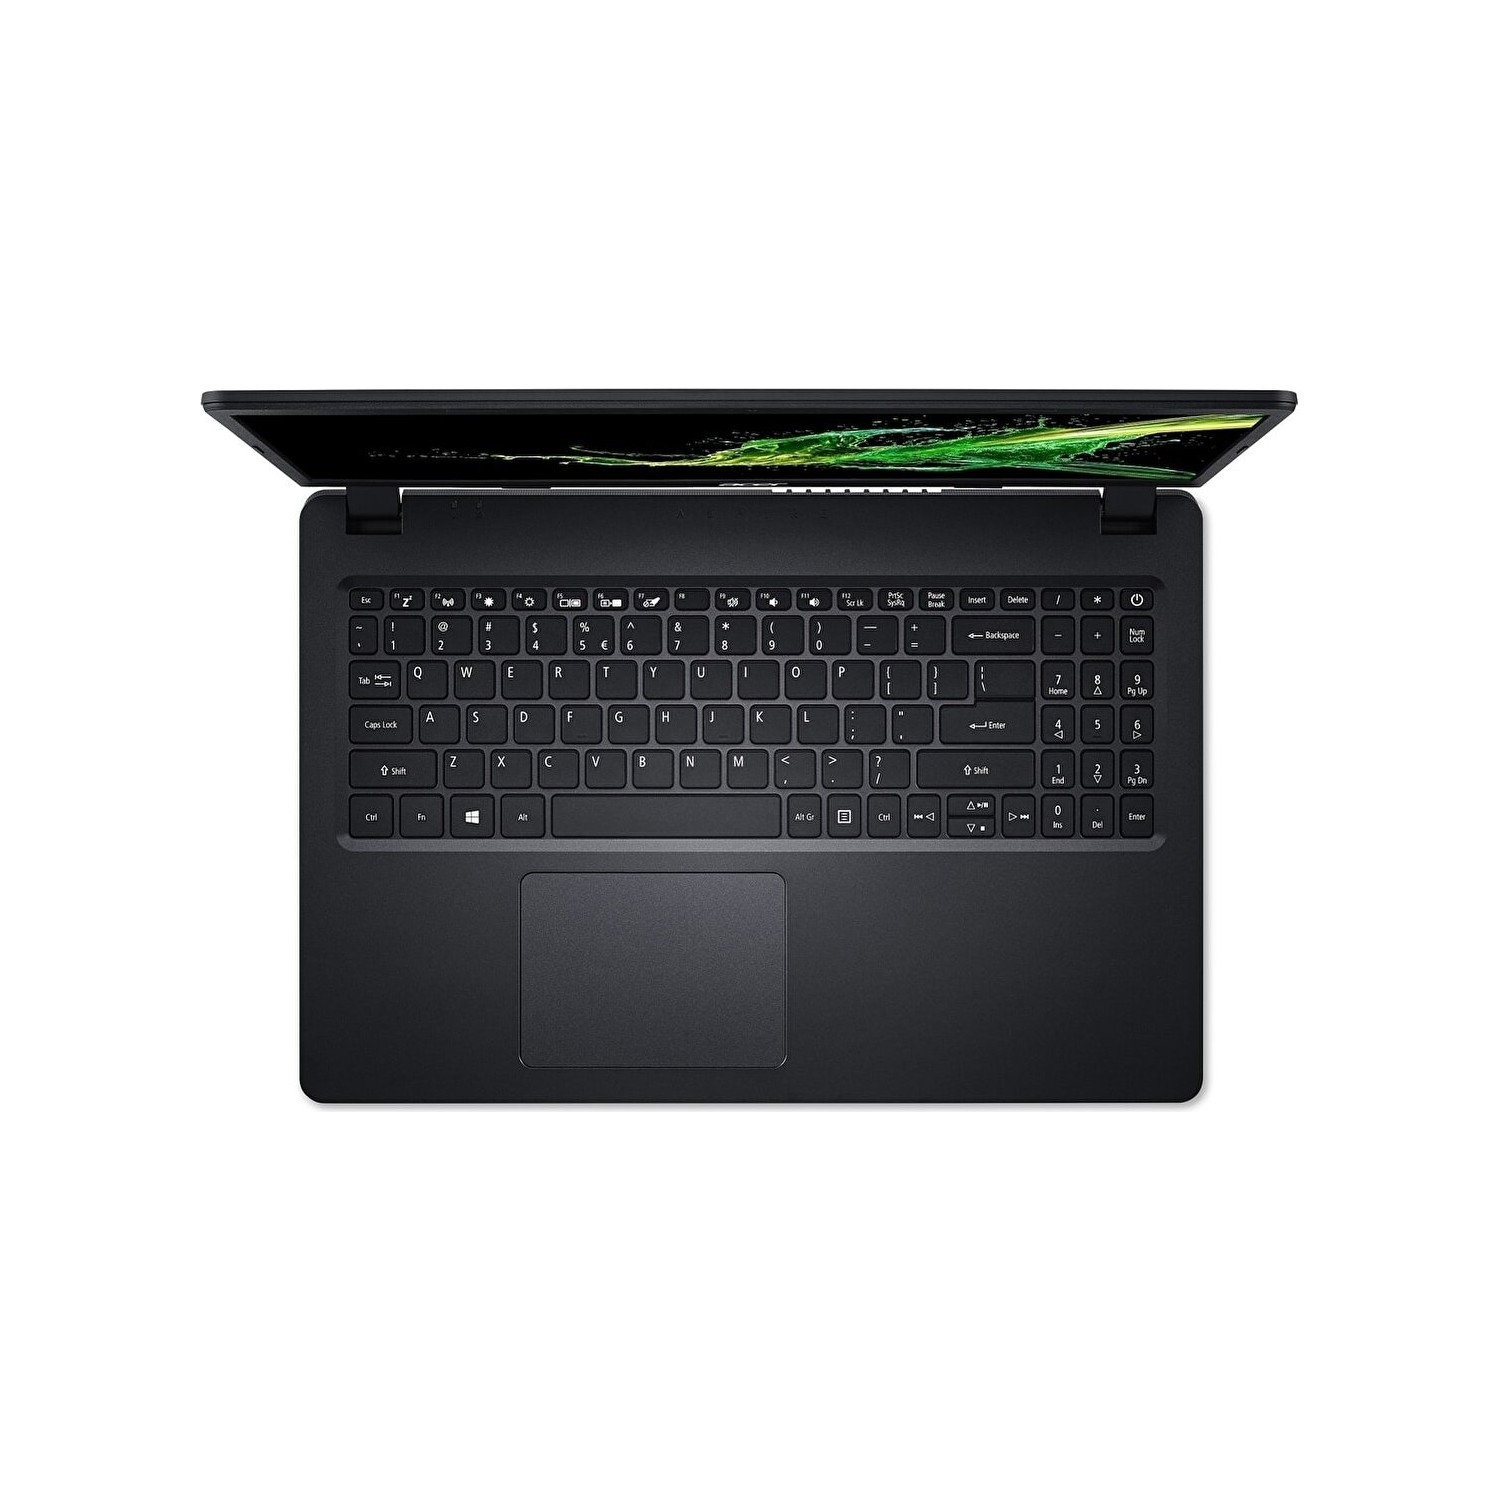 Aspire a315 55. Acer Aspire a315-34. Acer a315 55kg 31e4 клавиатура. Acer Aspire a315-34 Black Intel n4020 (up to 2.8GHZ), 8gb, 1tb + 512gb. Aspire a315-34 характеристики.